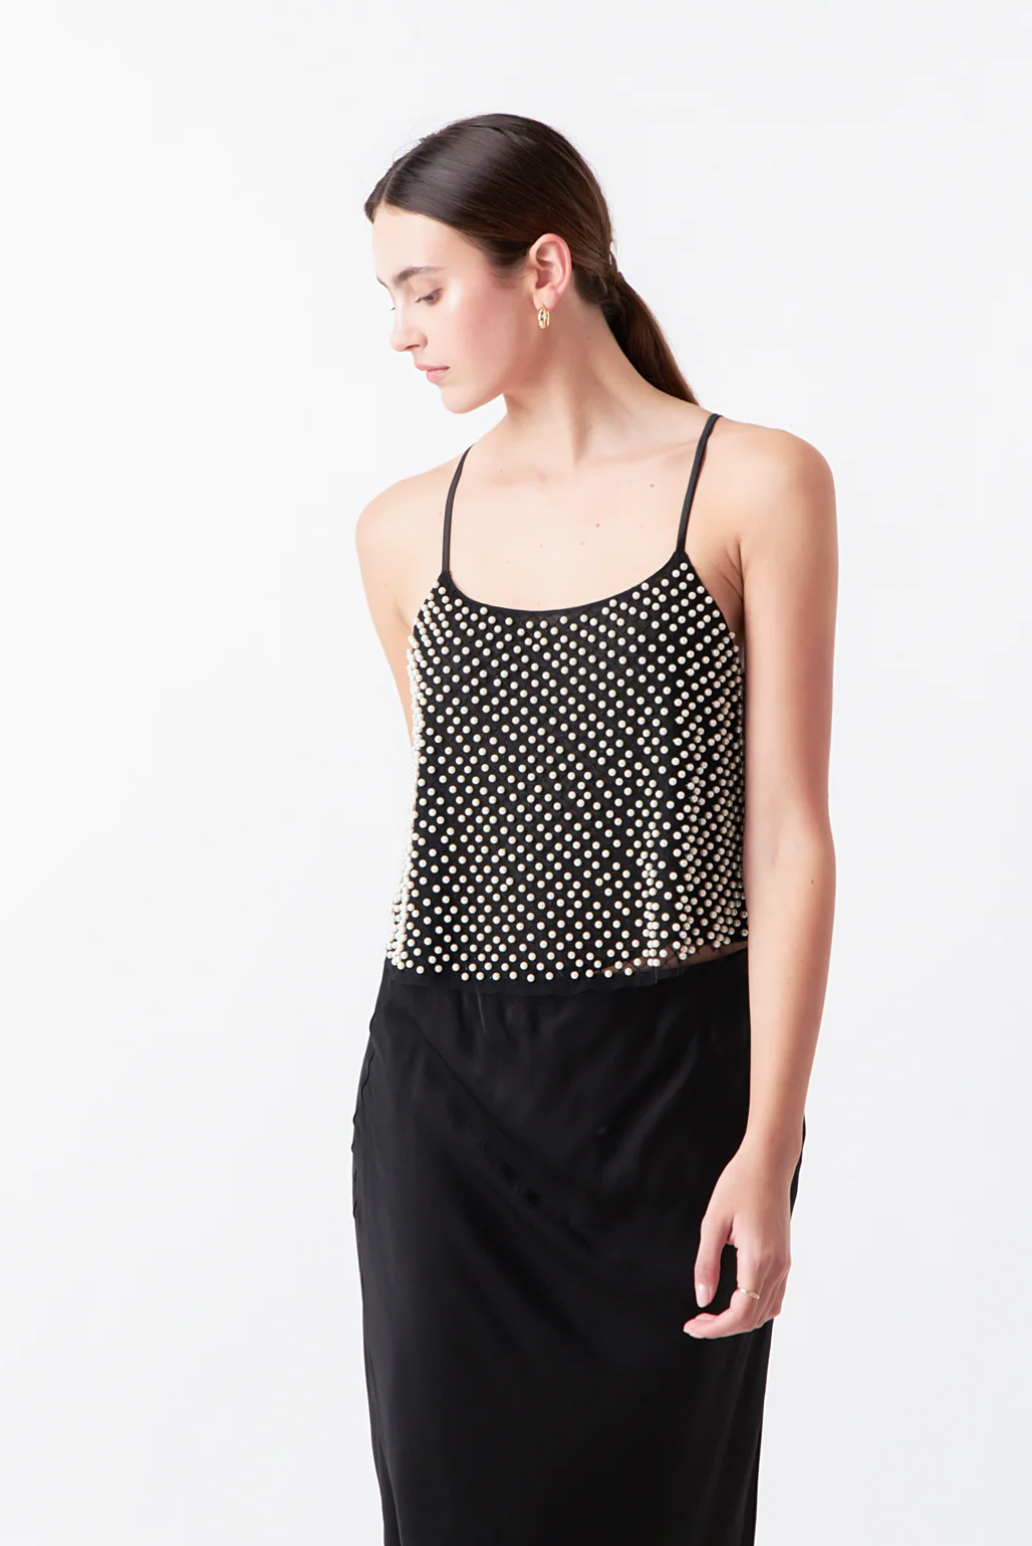 ER CK788T PEARL EMBELLISHED CAMI TOP - M. Clothes Shoes Lifestyle